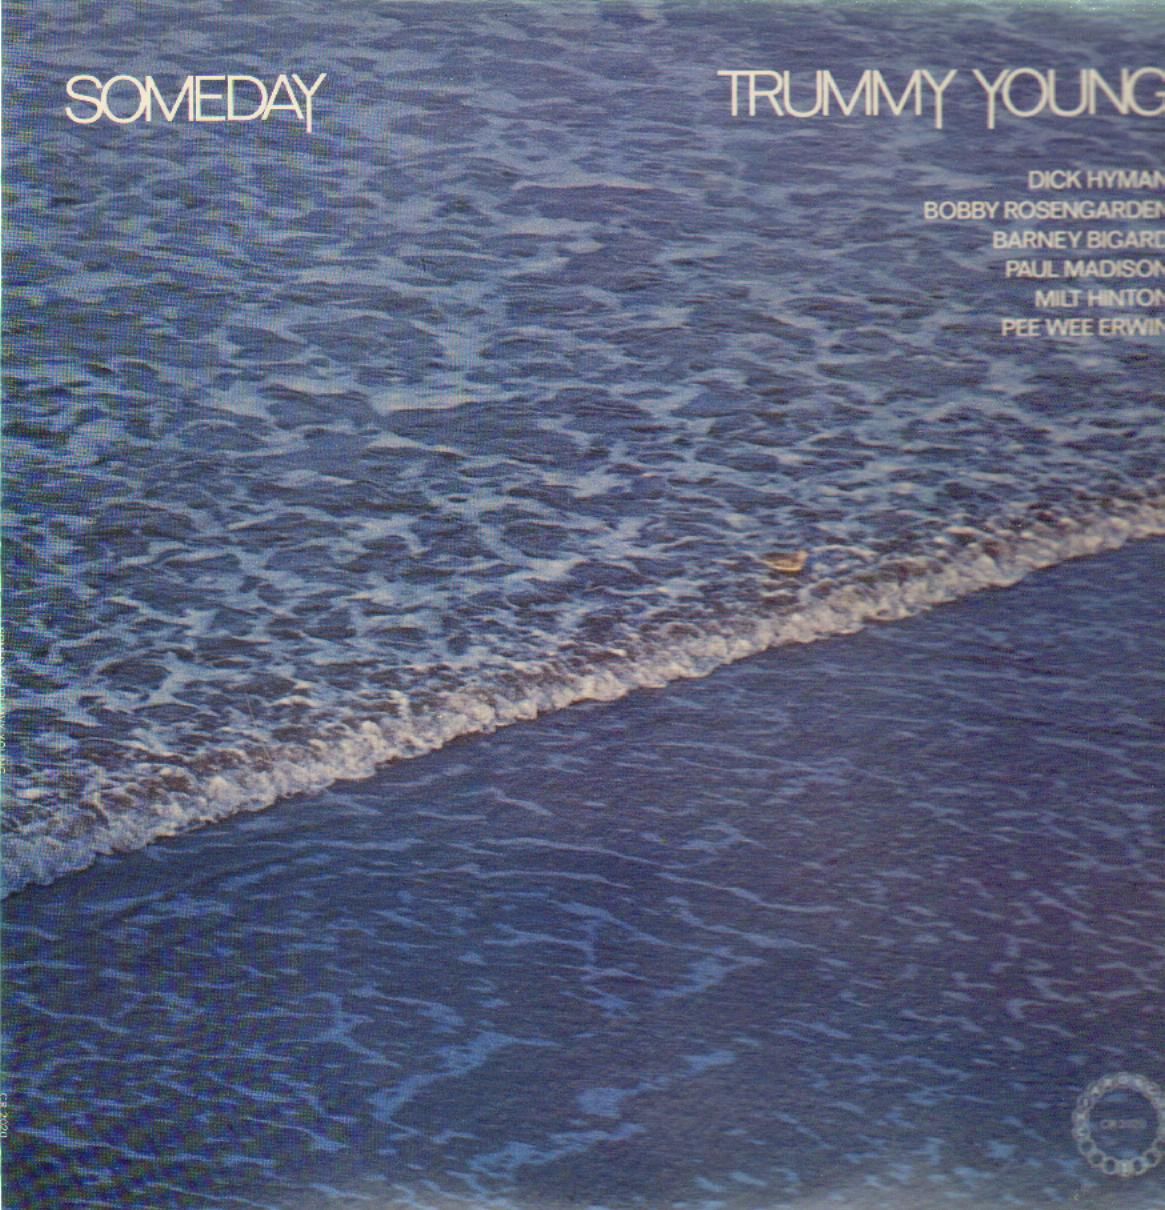 TRUMMY YOUNG - Someday cover 